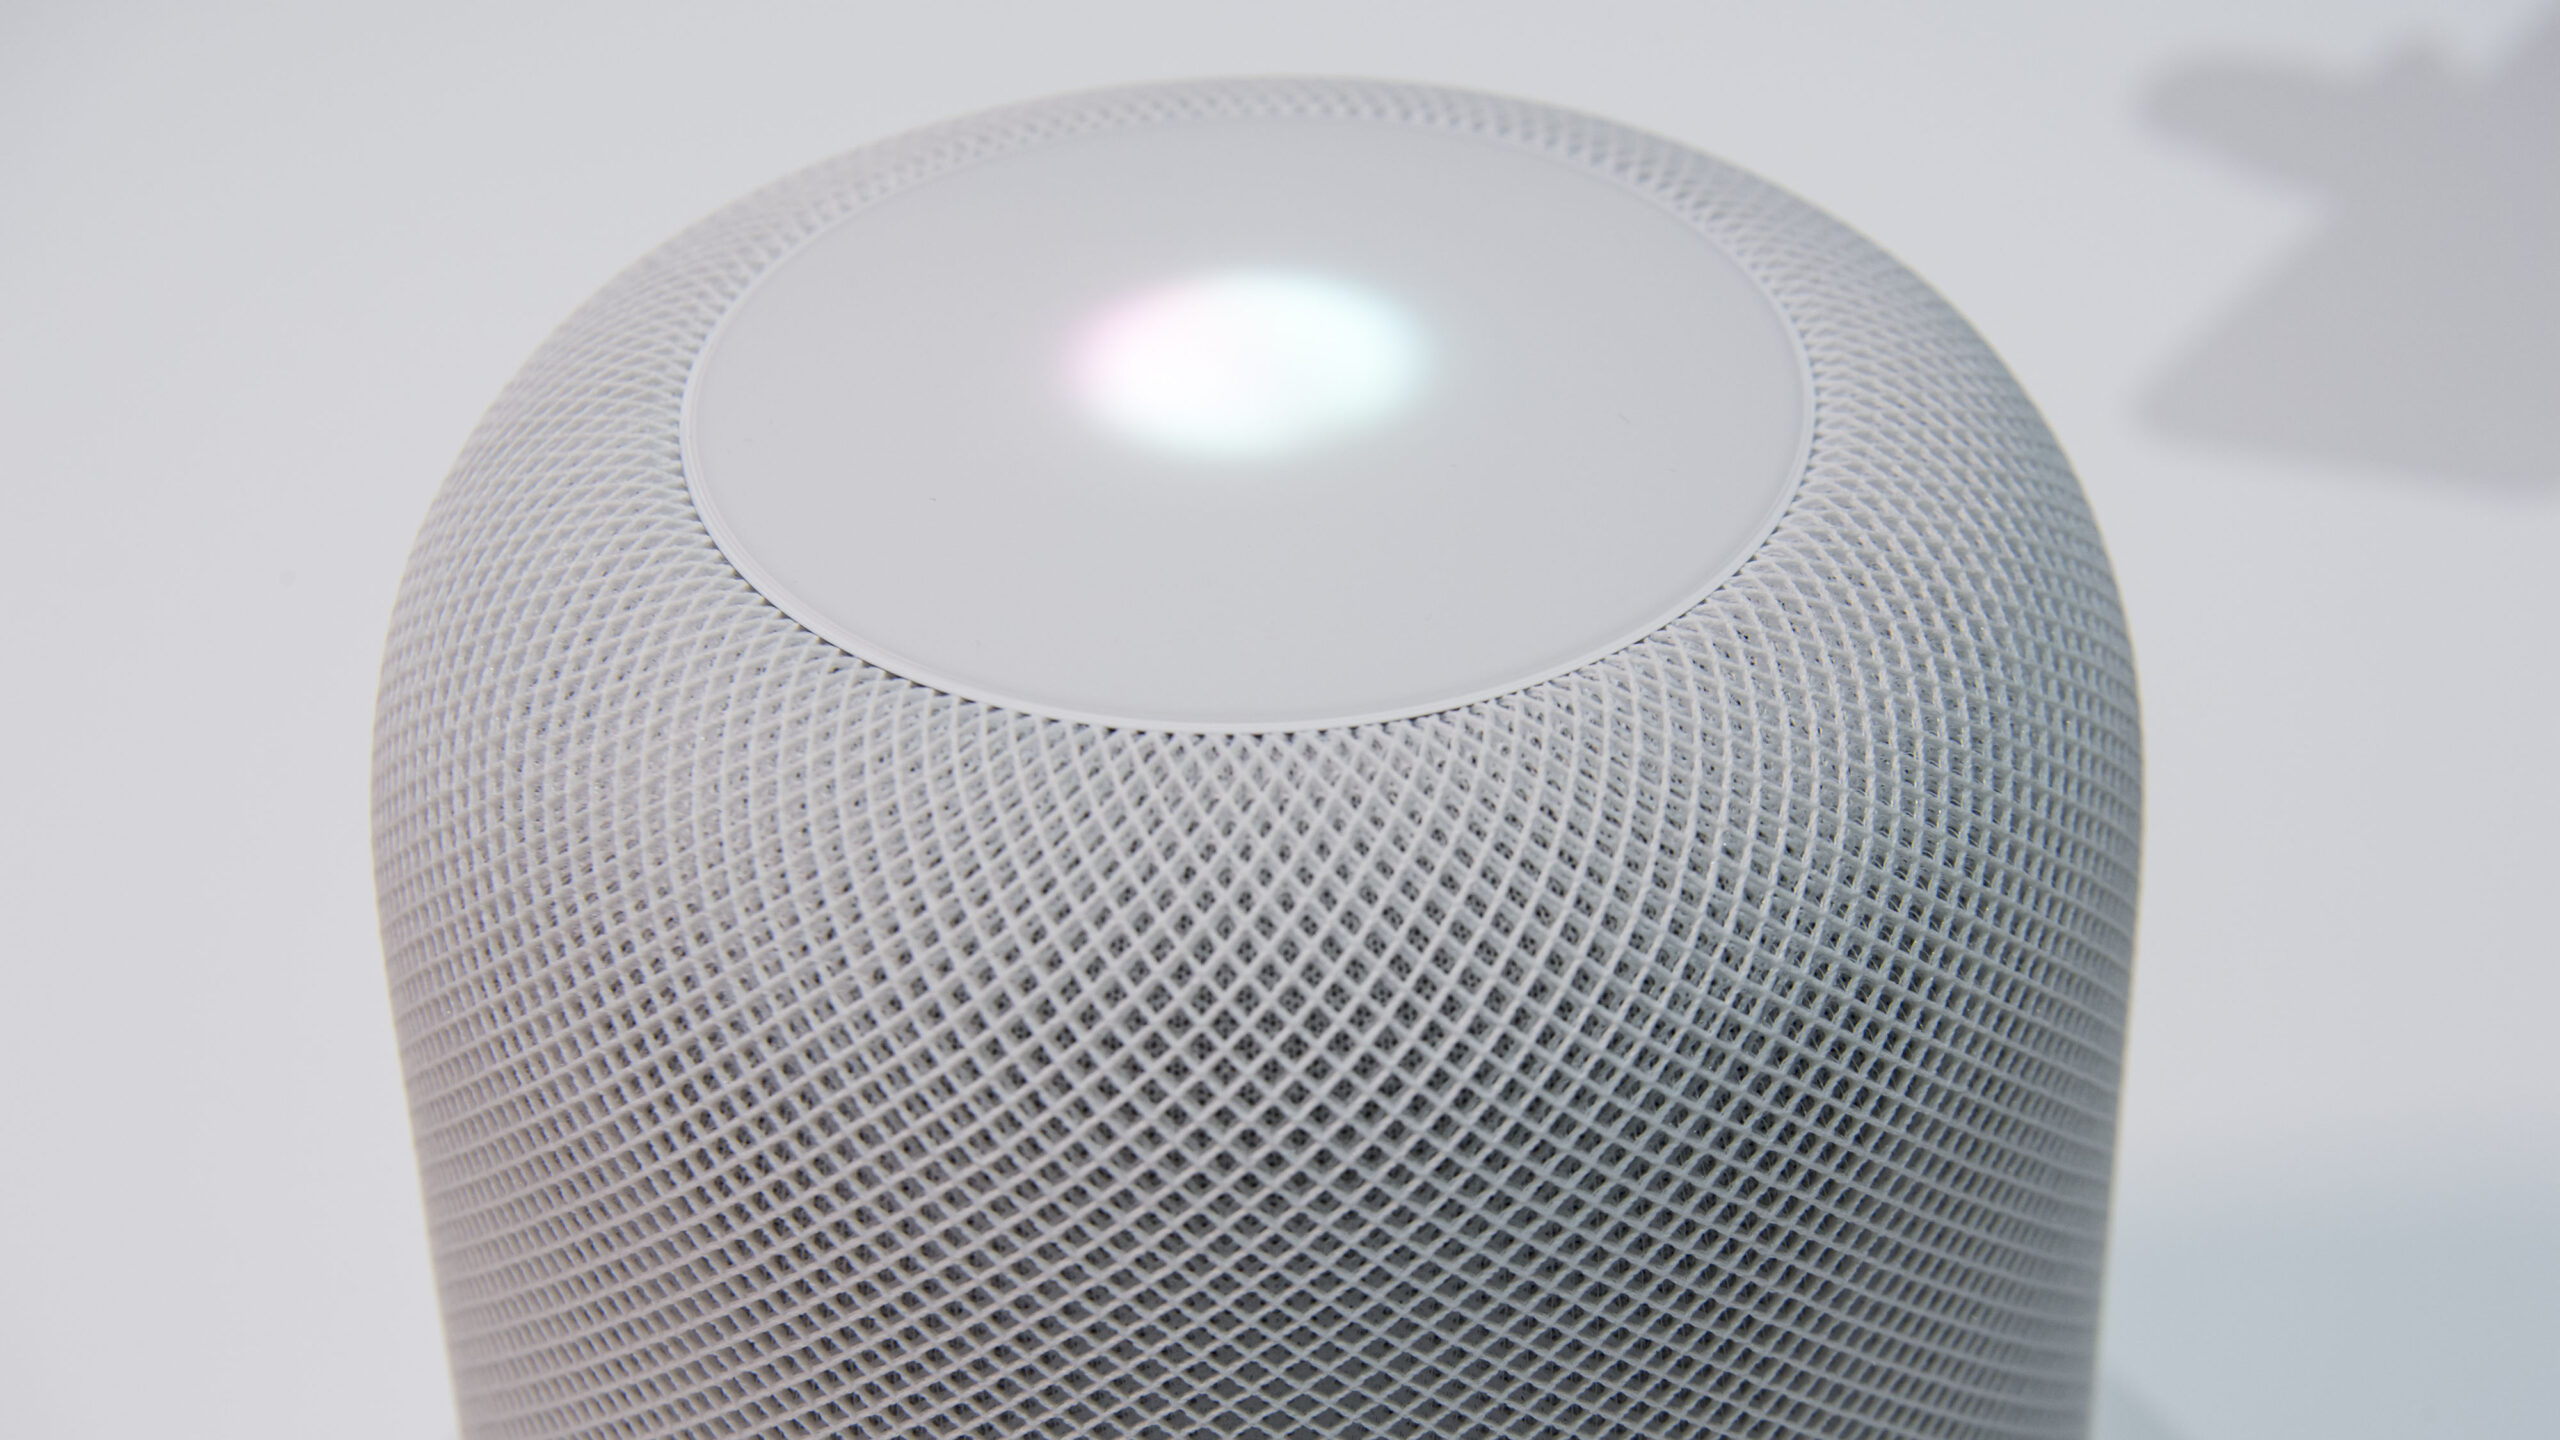 HomePod has his tongue in his teeth again, bringing details about the “iPhone 8” screen (and about himself)